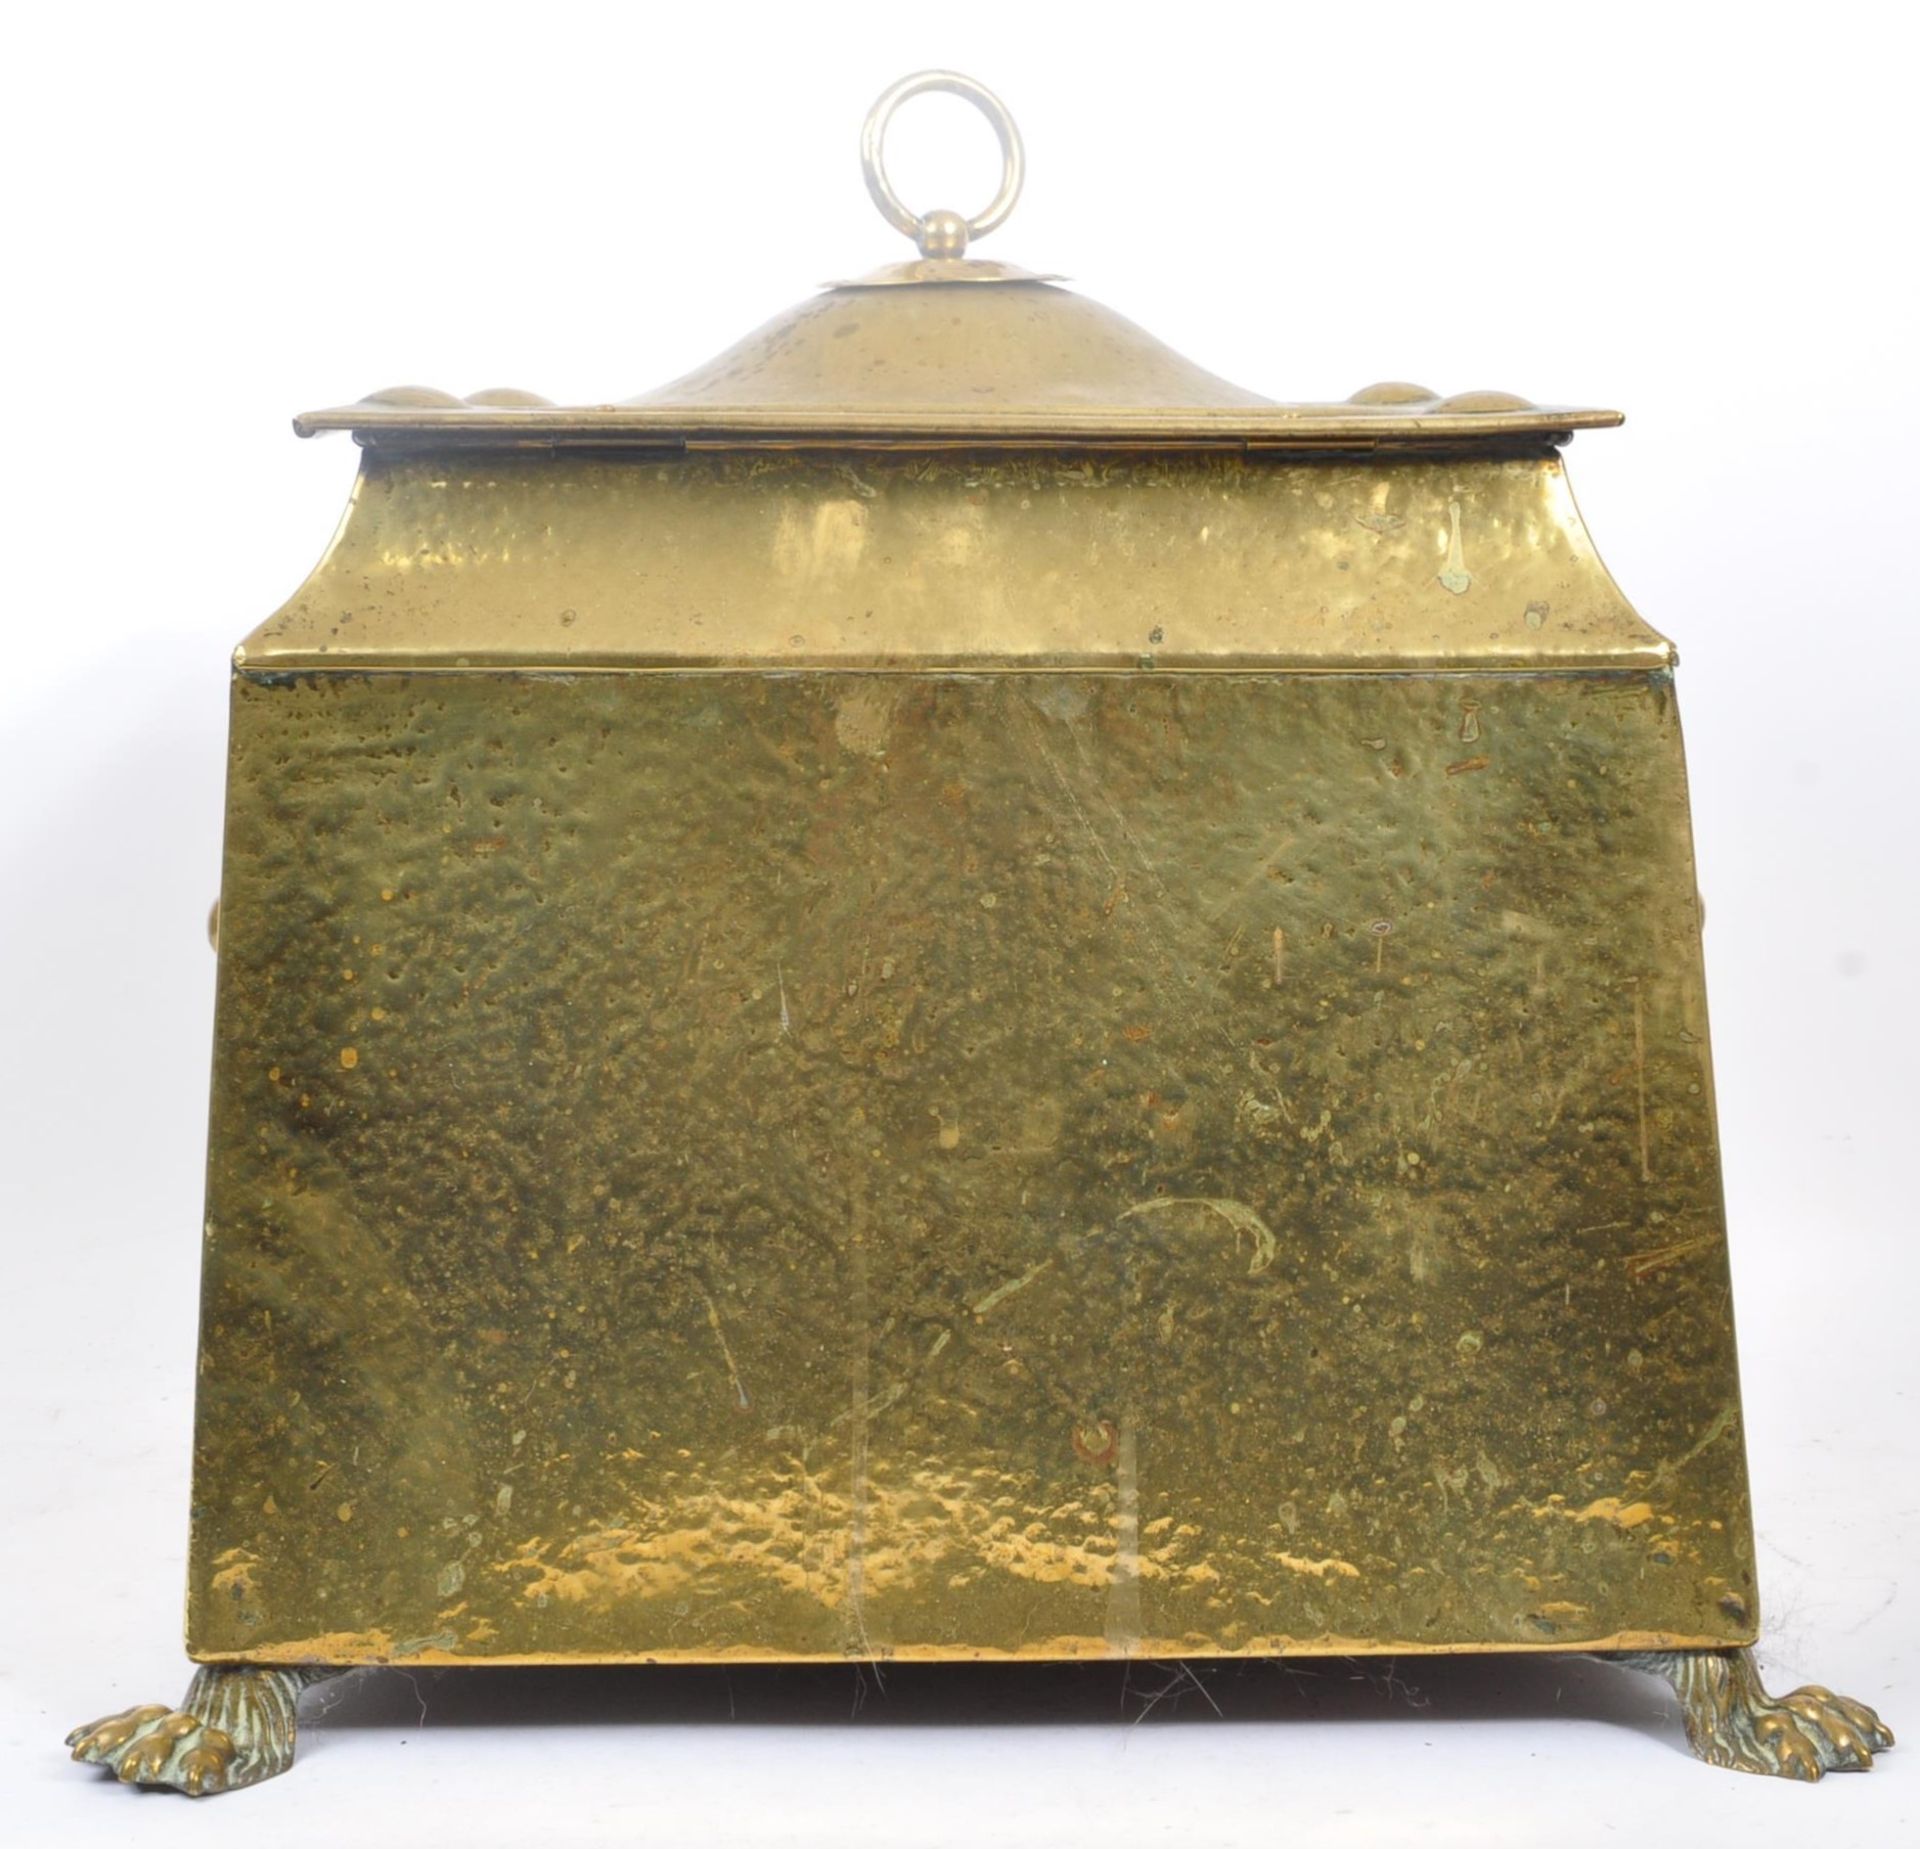 EARLY 20TH CENTURY BRASS ART NOUVEAU COAL SCUTTLE - Image 5 of 7